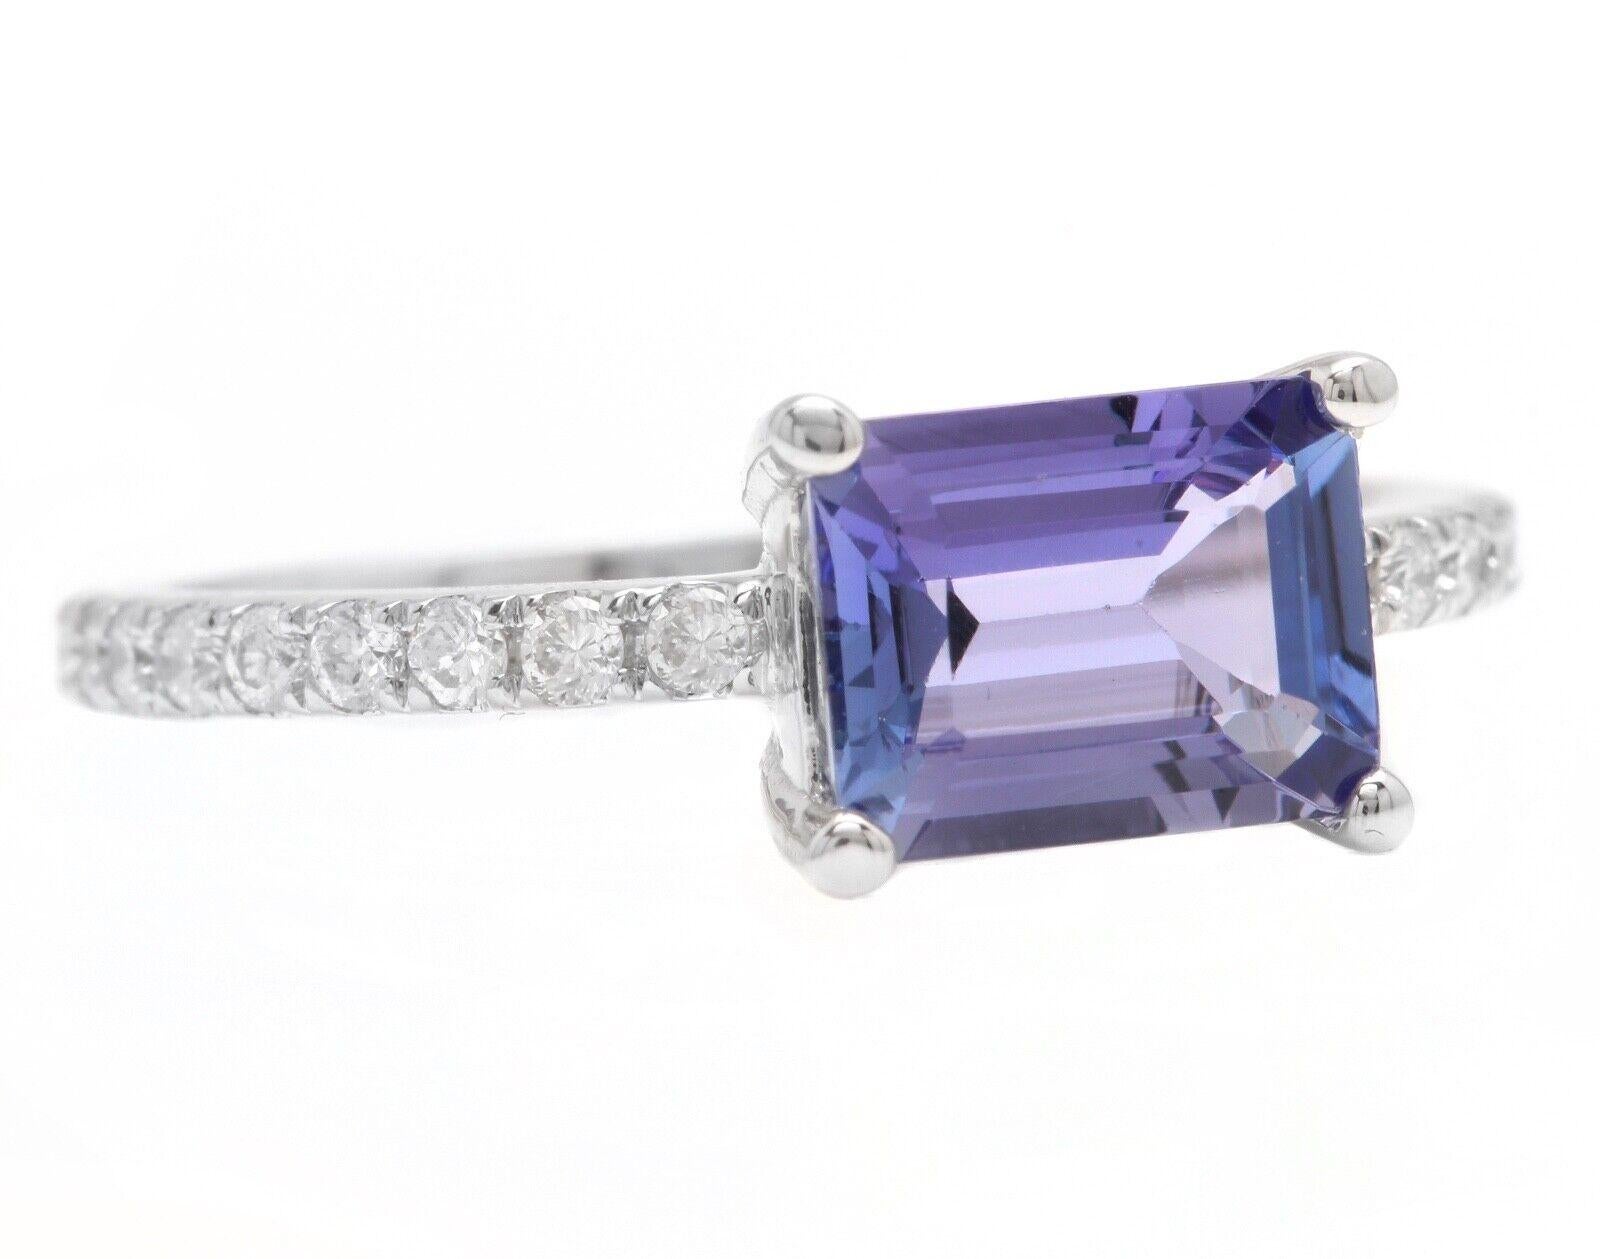 1.90 Carats Natural Very Nice Looking Tanzanite and Diamond 14K Solid White Gold Ring

Suggested Replacement Value: Approx.  $3,500.00

Total Natural Emerald Cut Tanzanite Weight is: Approx.  1.58 Carats

Tanzanite Measures: Approx. 8.00 x 6.00mm
